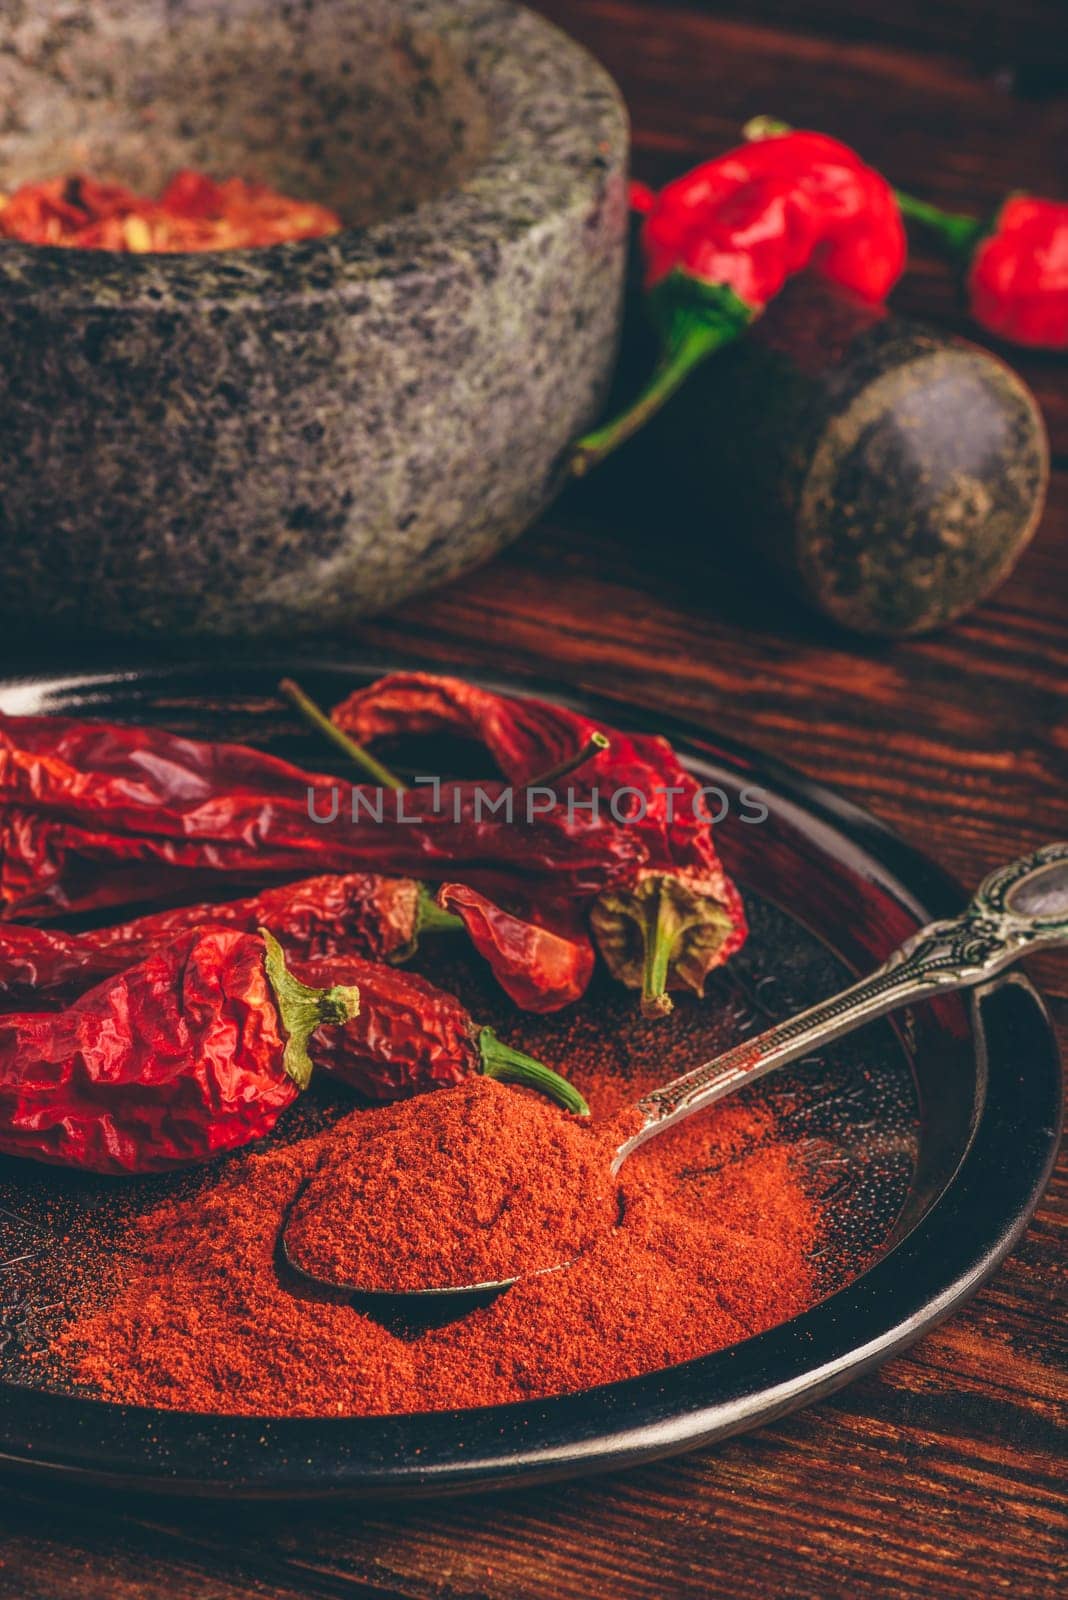 Spoonful of ground chili pepper with dried fruits on metal plate